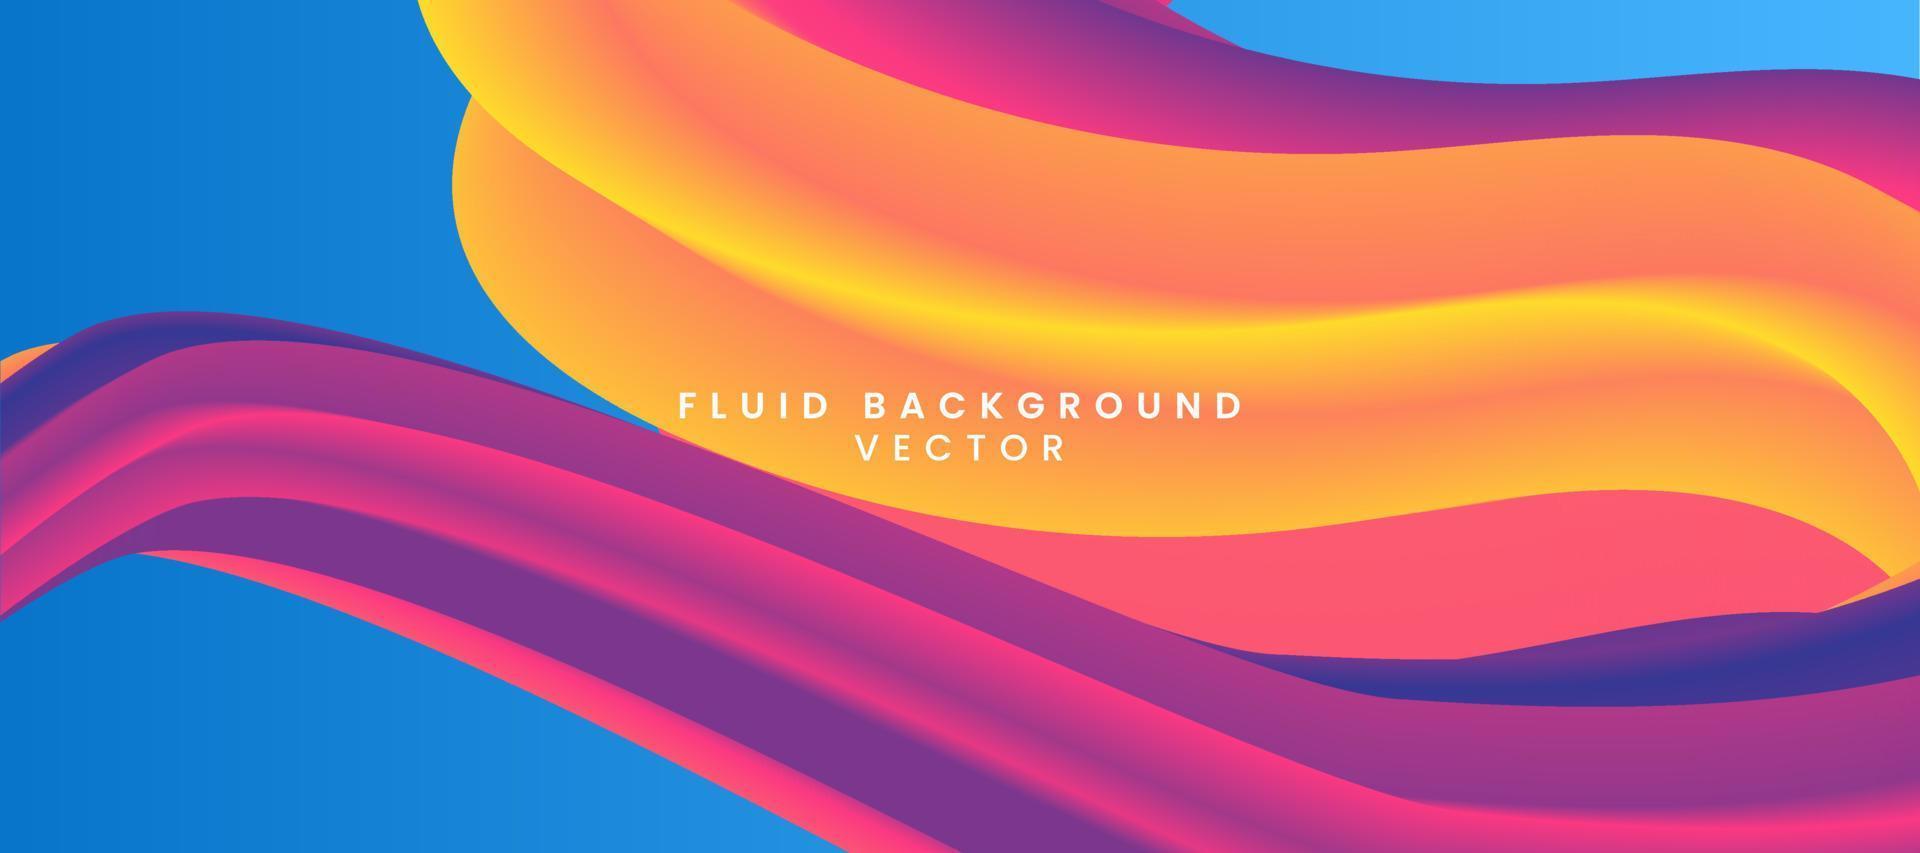 abstract fluid background vector illustration template